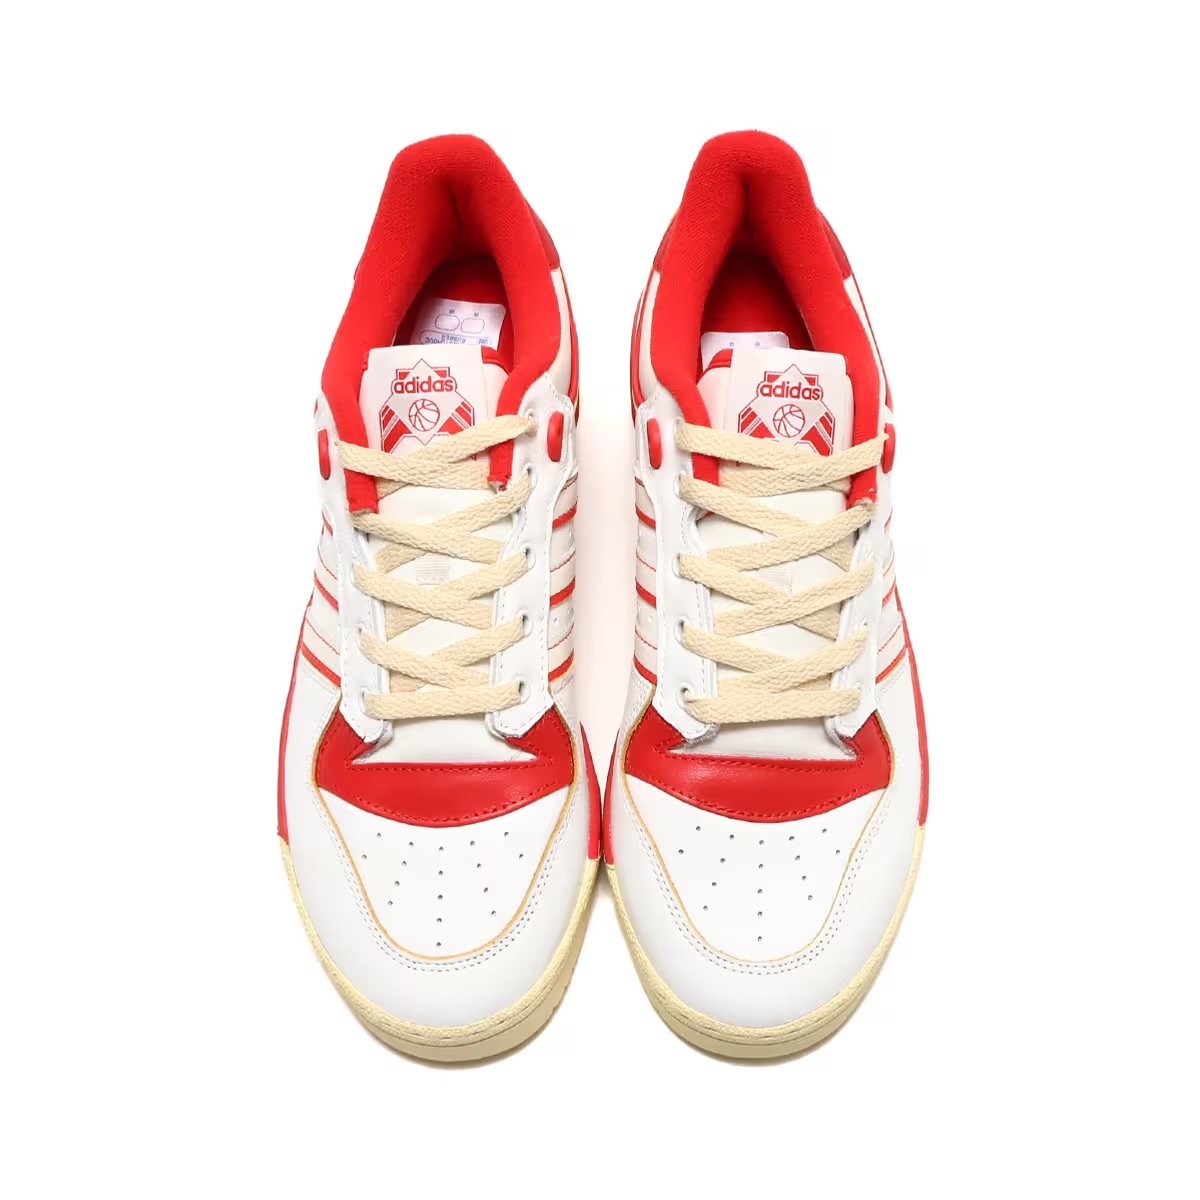  regular price 13200 jpy new goods regular goods Adidas great popularity reissue model Adidas li bar Lee low 86 leather white X red Vintage processing 27.